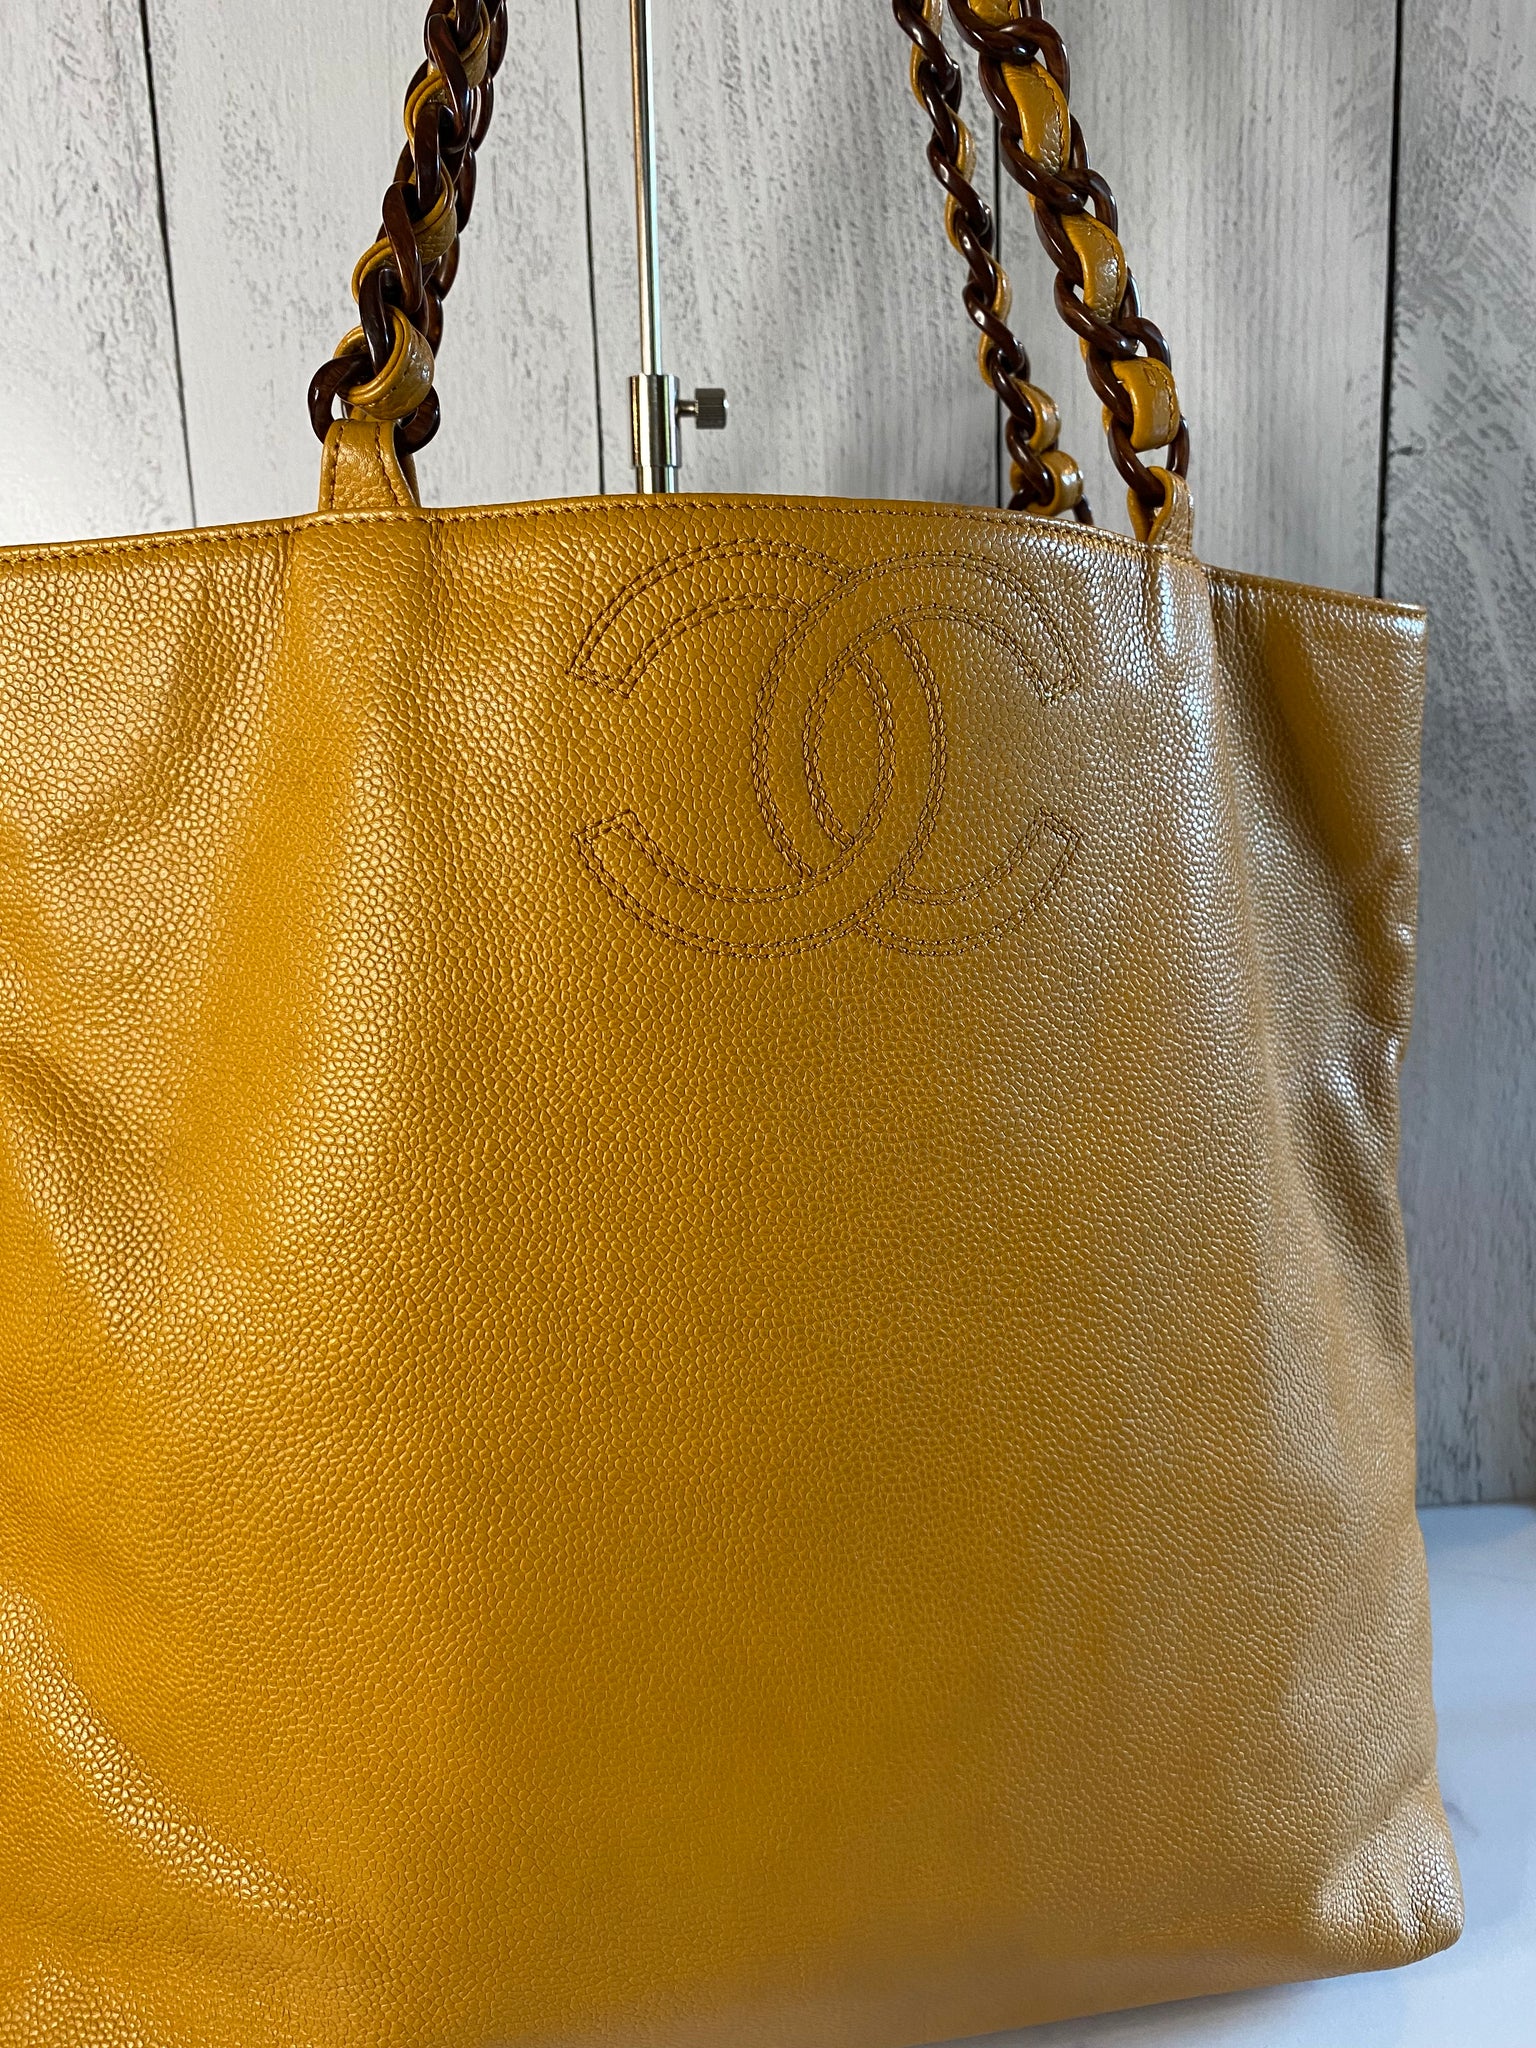 chanel gold tote bag leather